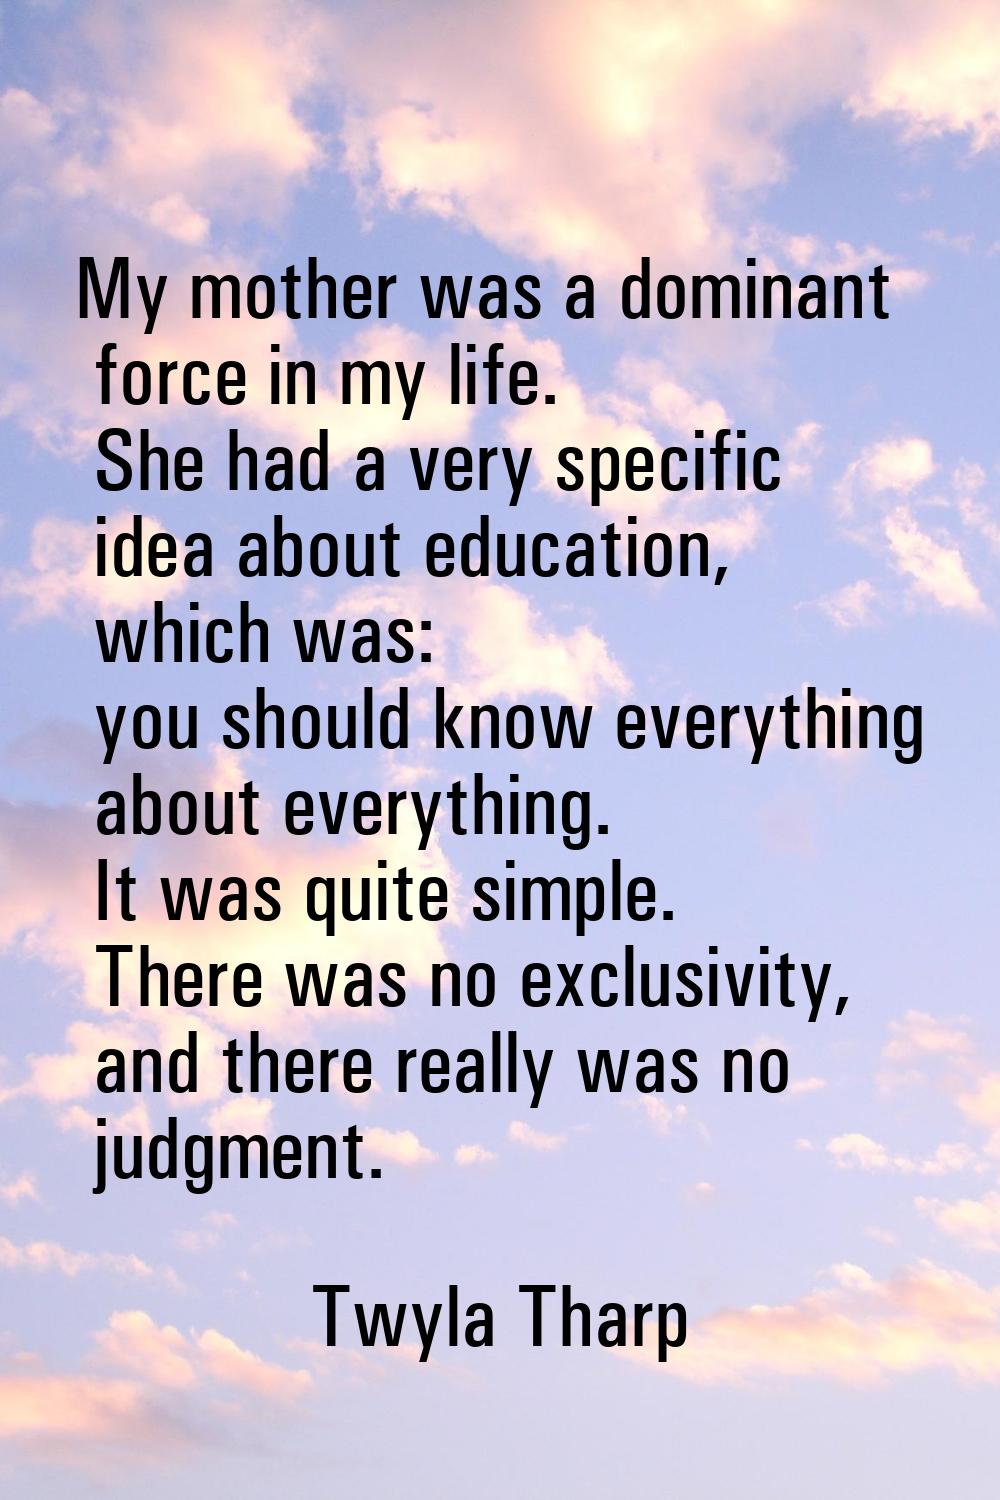 My mother was a dominant force in my life. She had a very specific idea about education, which was: